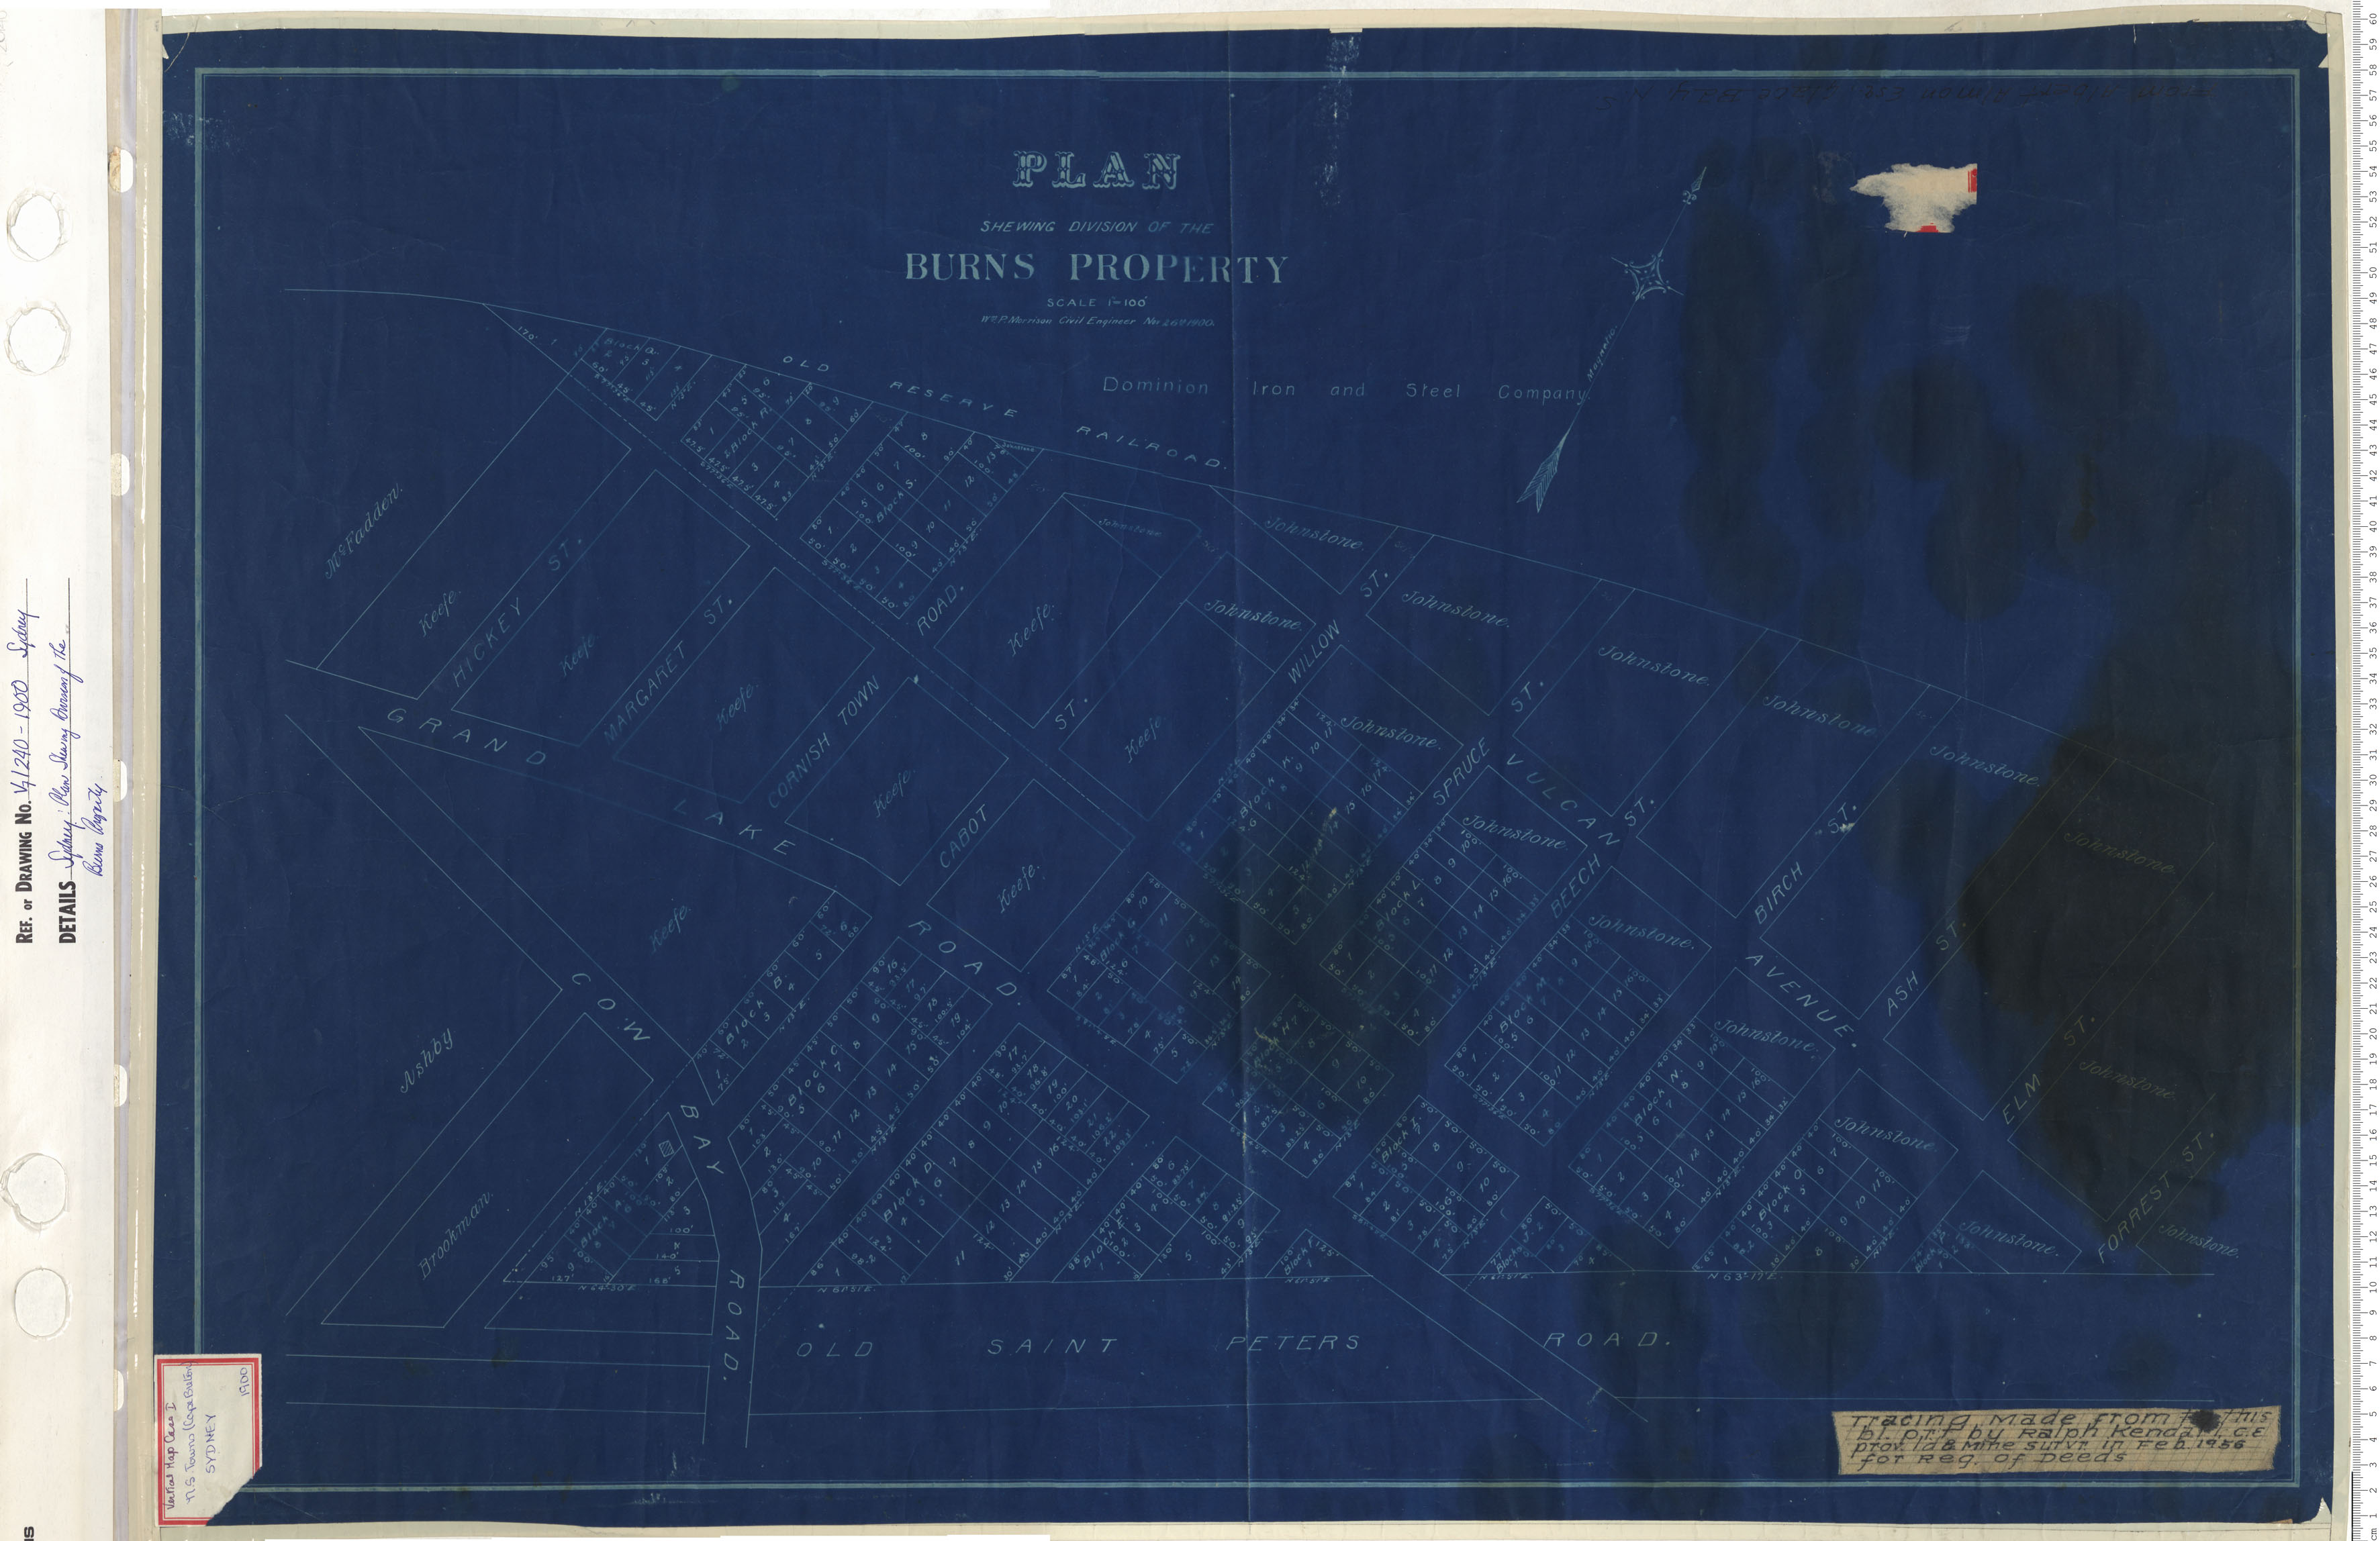 Sydney: Plan Shewing Division of the Burns Property